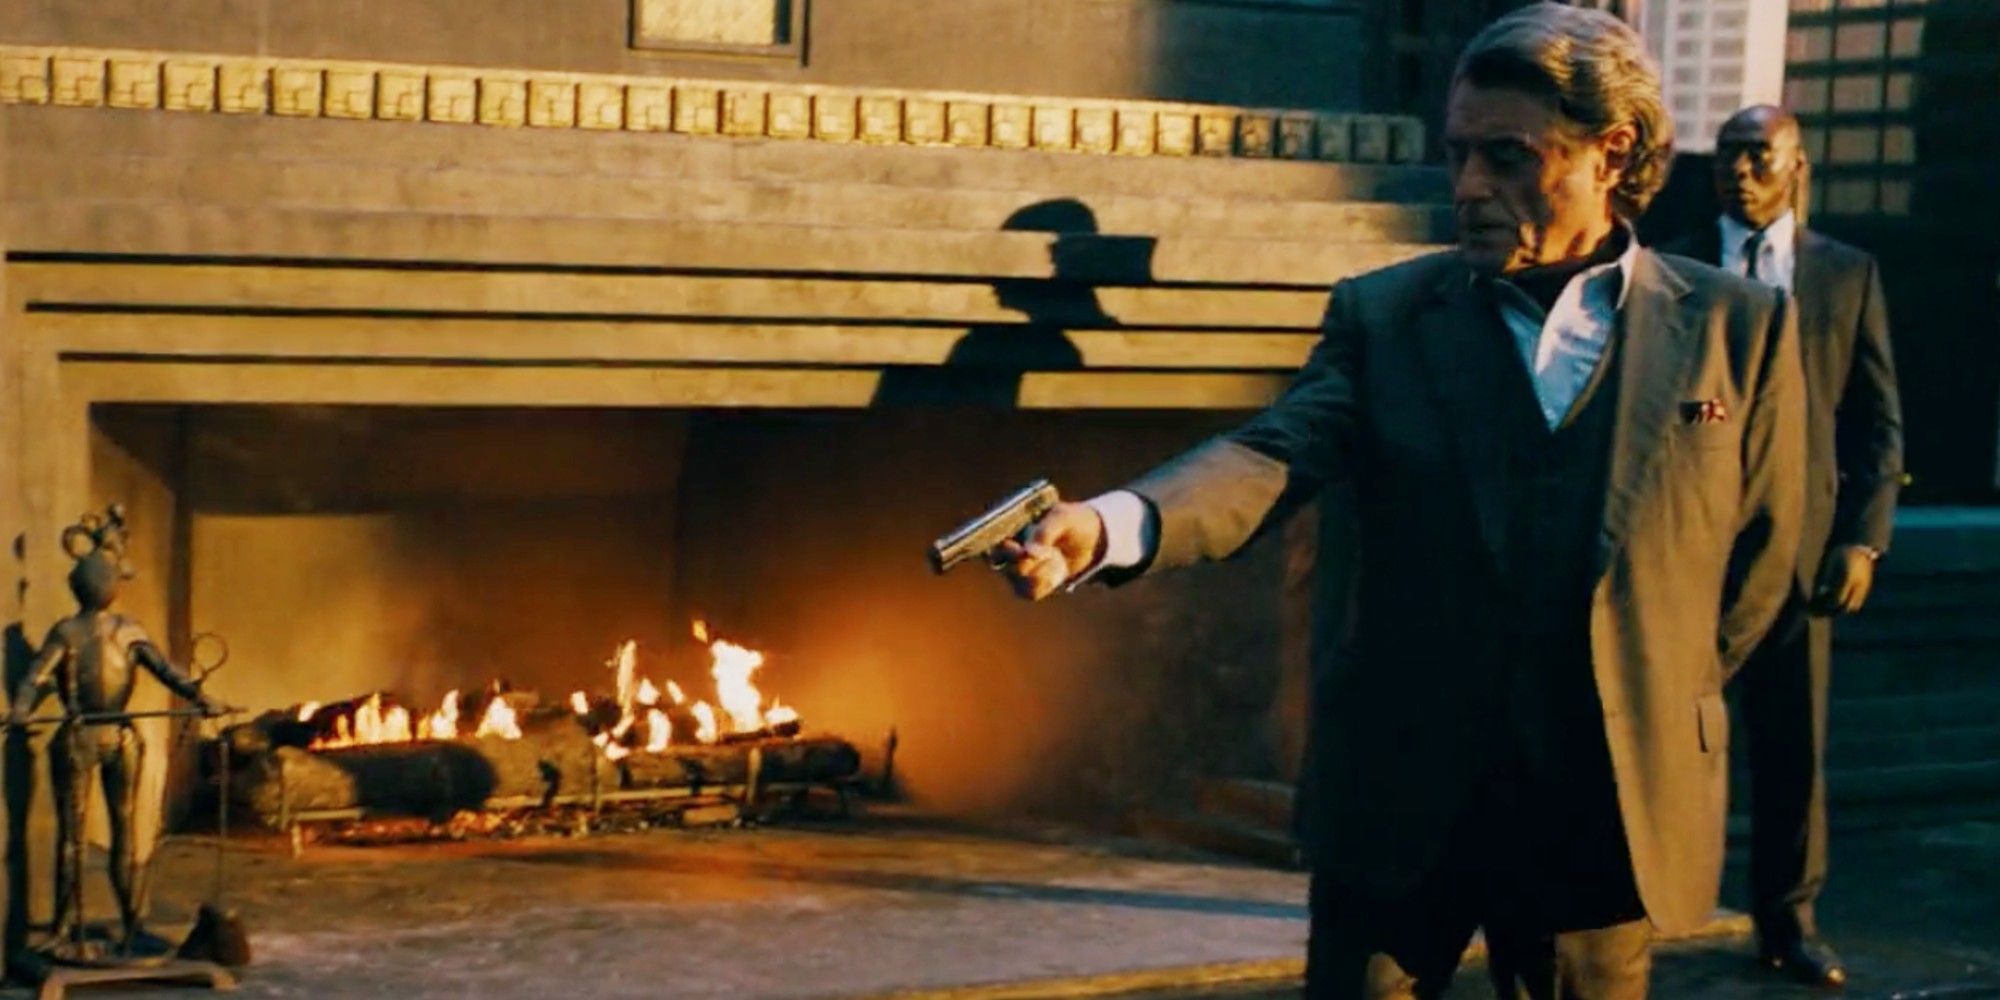 Winston shoots John on the roof in John Wick: Chapter 3 - Parabellum.